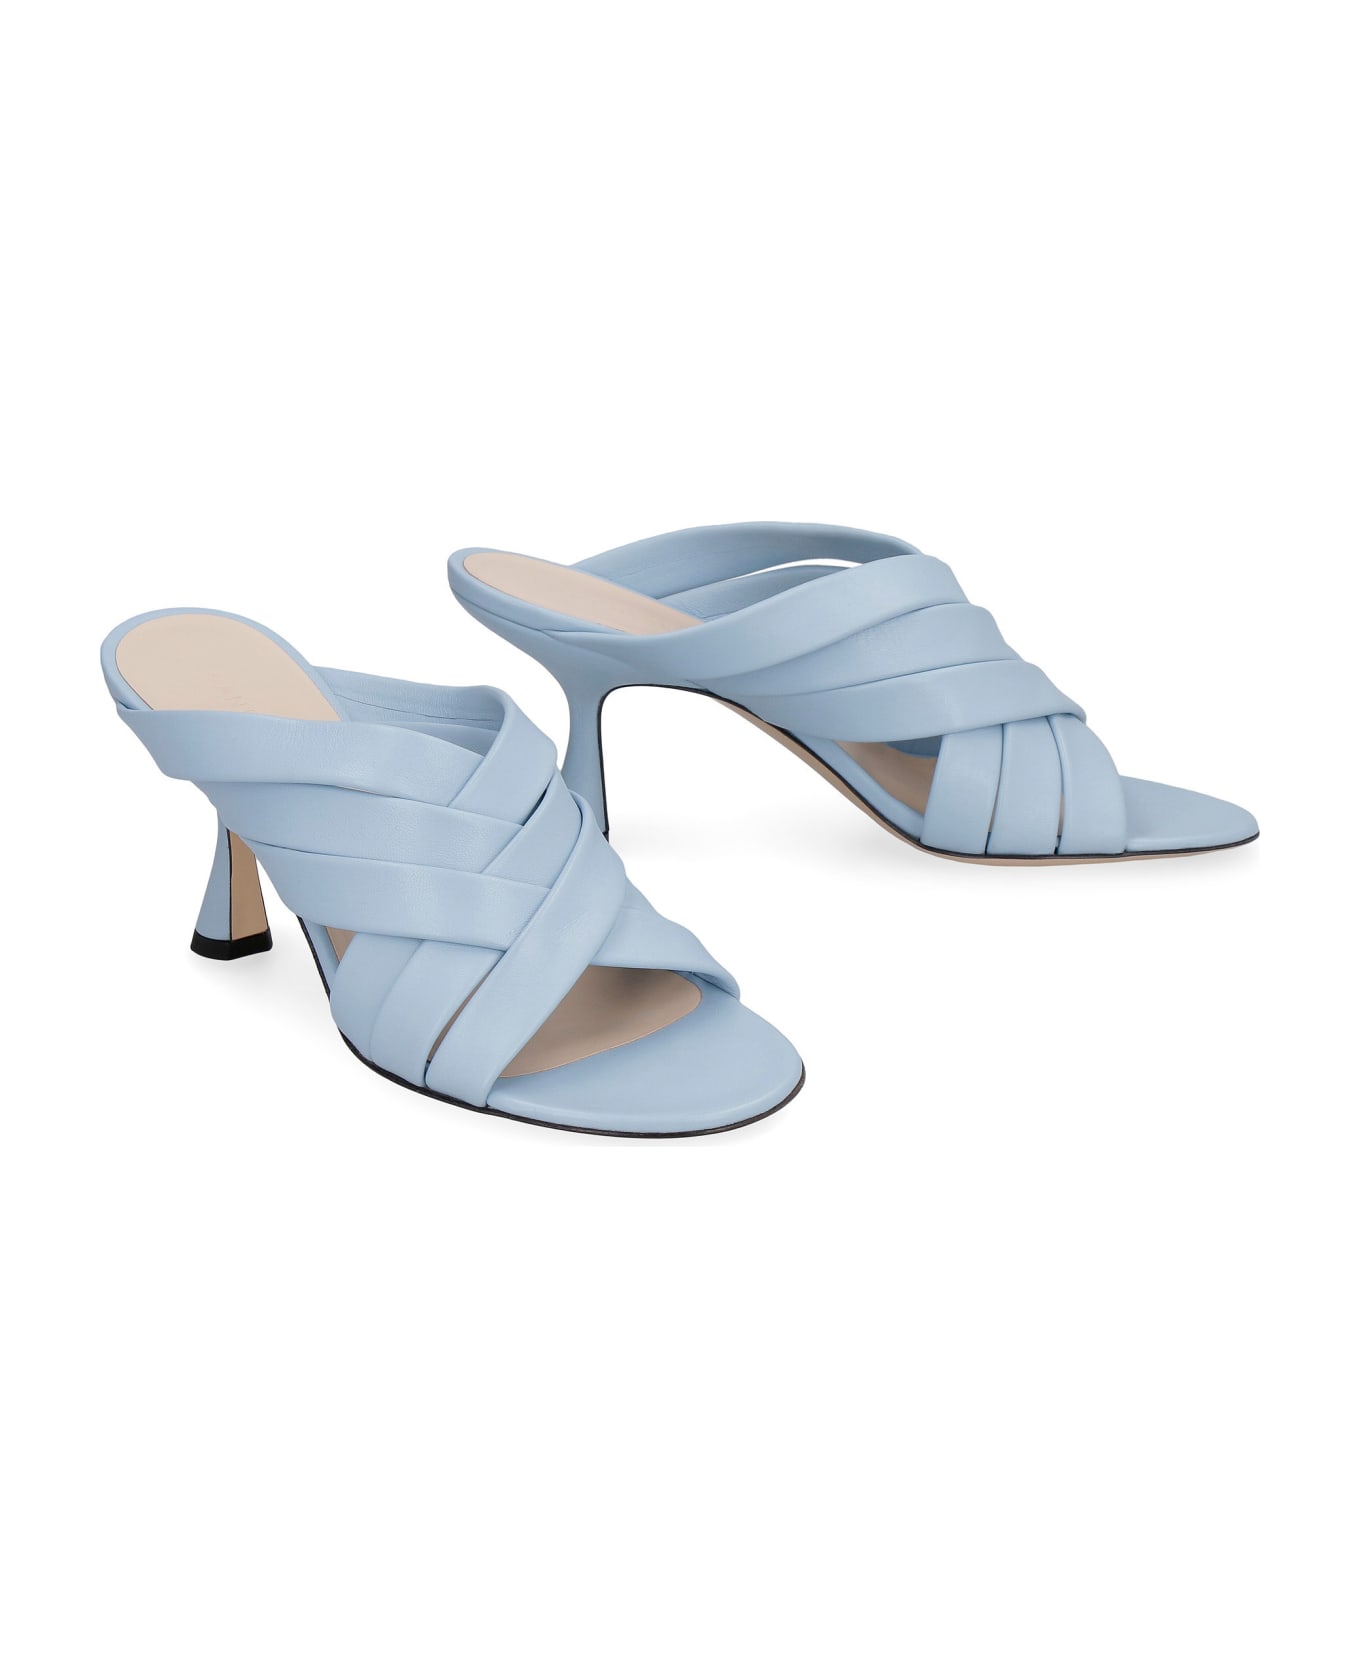 Wandler Louie Leather Mules - Light Blue